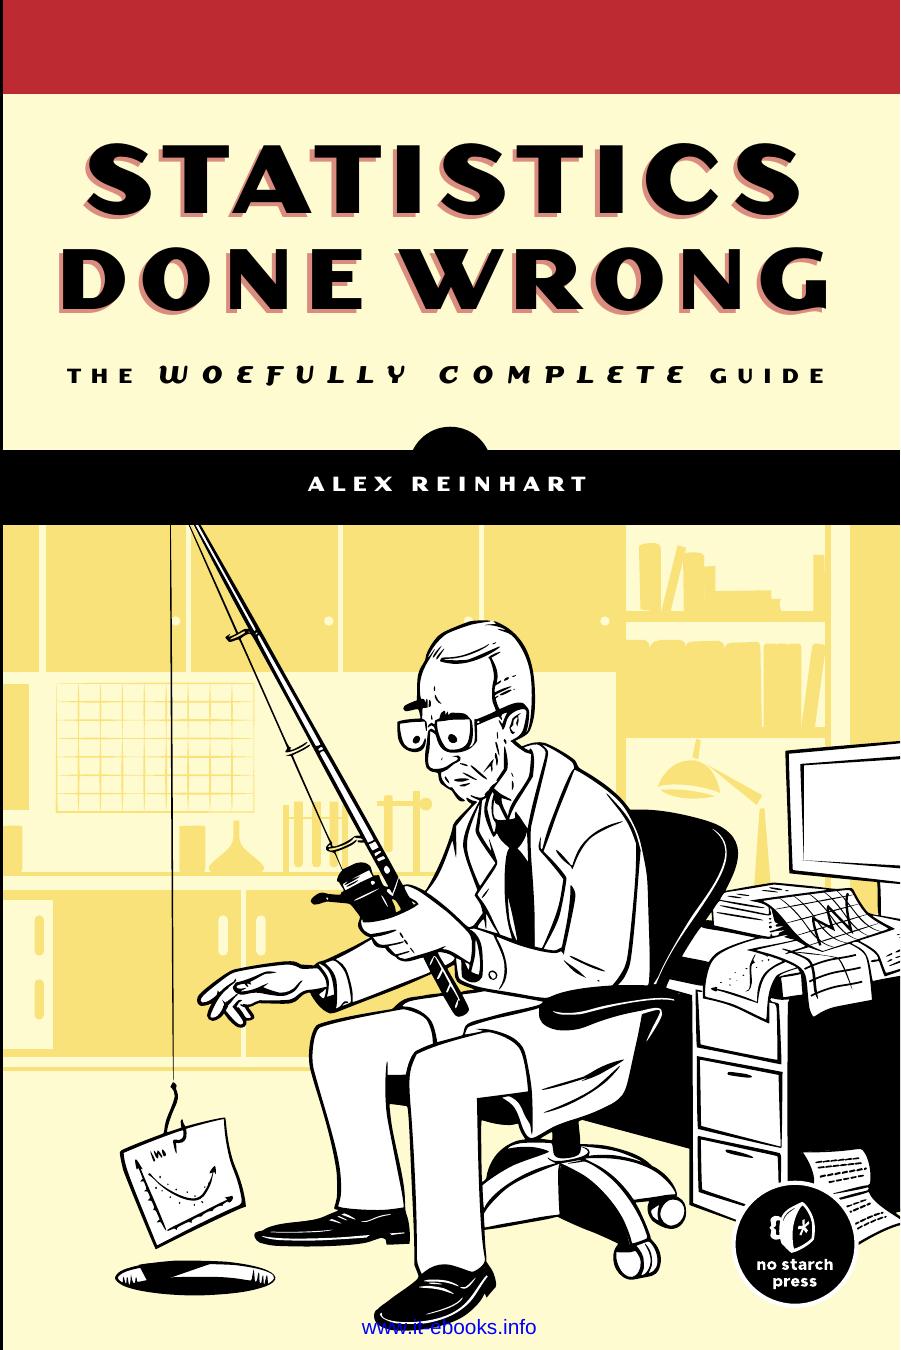 Statistics Done Wrong: The Woefully Complete Guide by Alex Reinhart